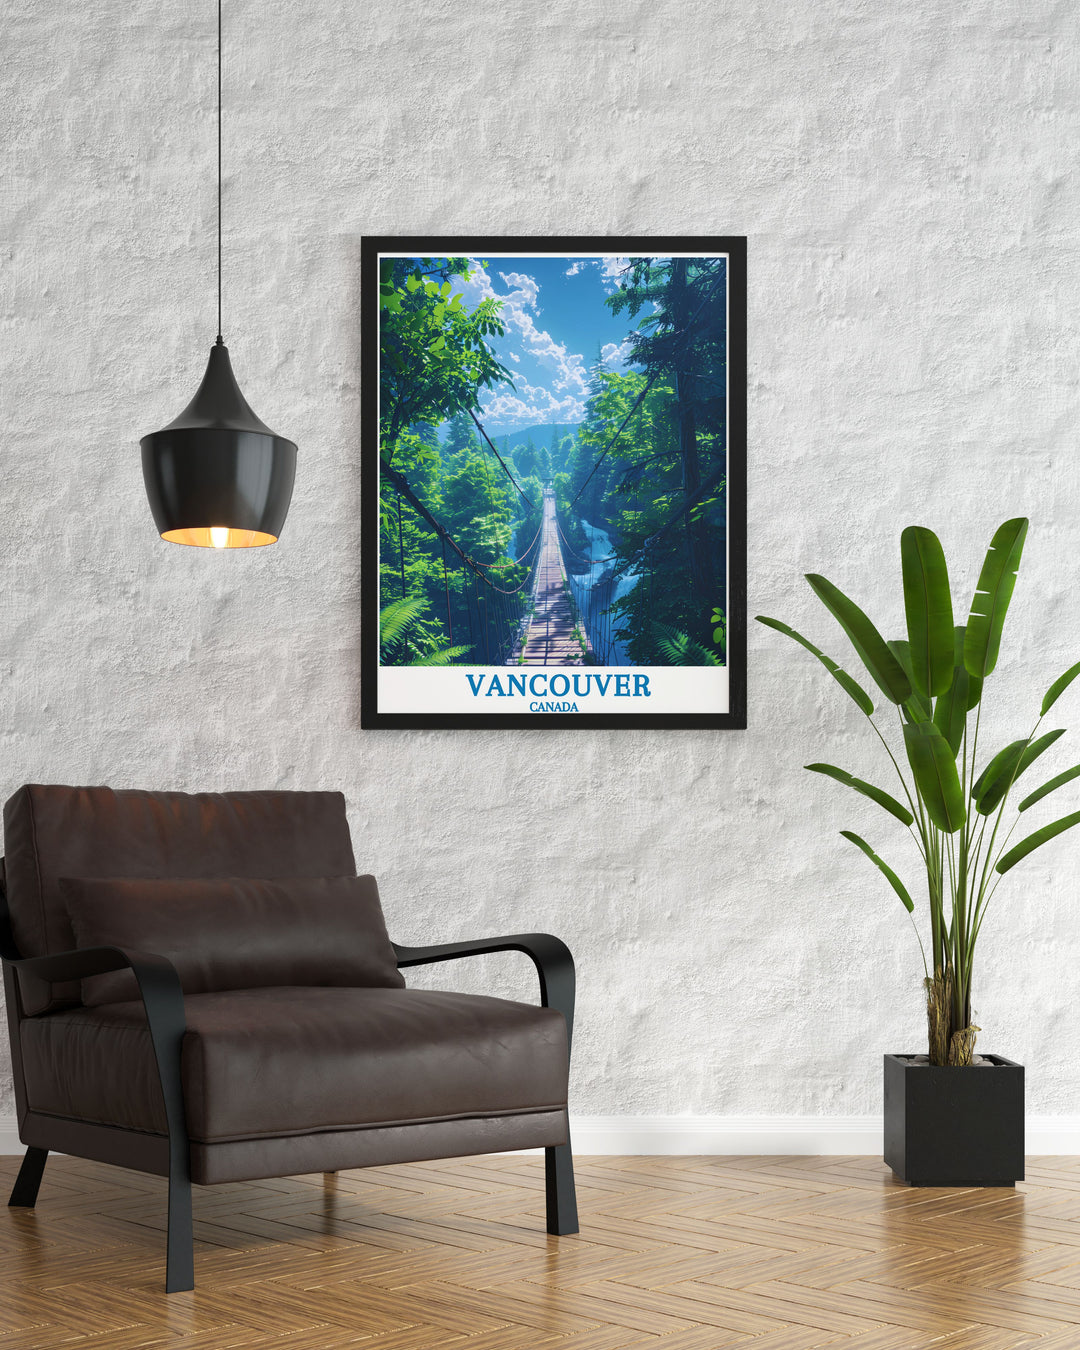 This travel poster of the Capilano Suspension Bridge captures the essence of its exhilarating heights and surrounding natural beauty. An excellent piece for those who appreciate both nature and engineering marvels, it adds dynamic energy to any room.